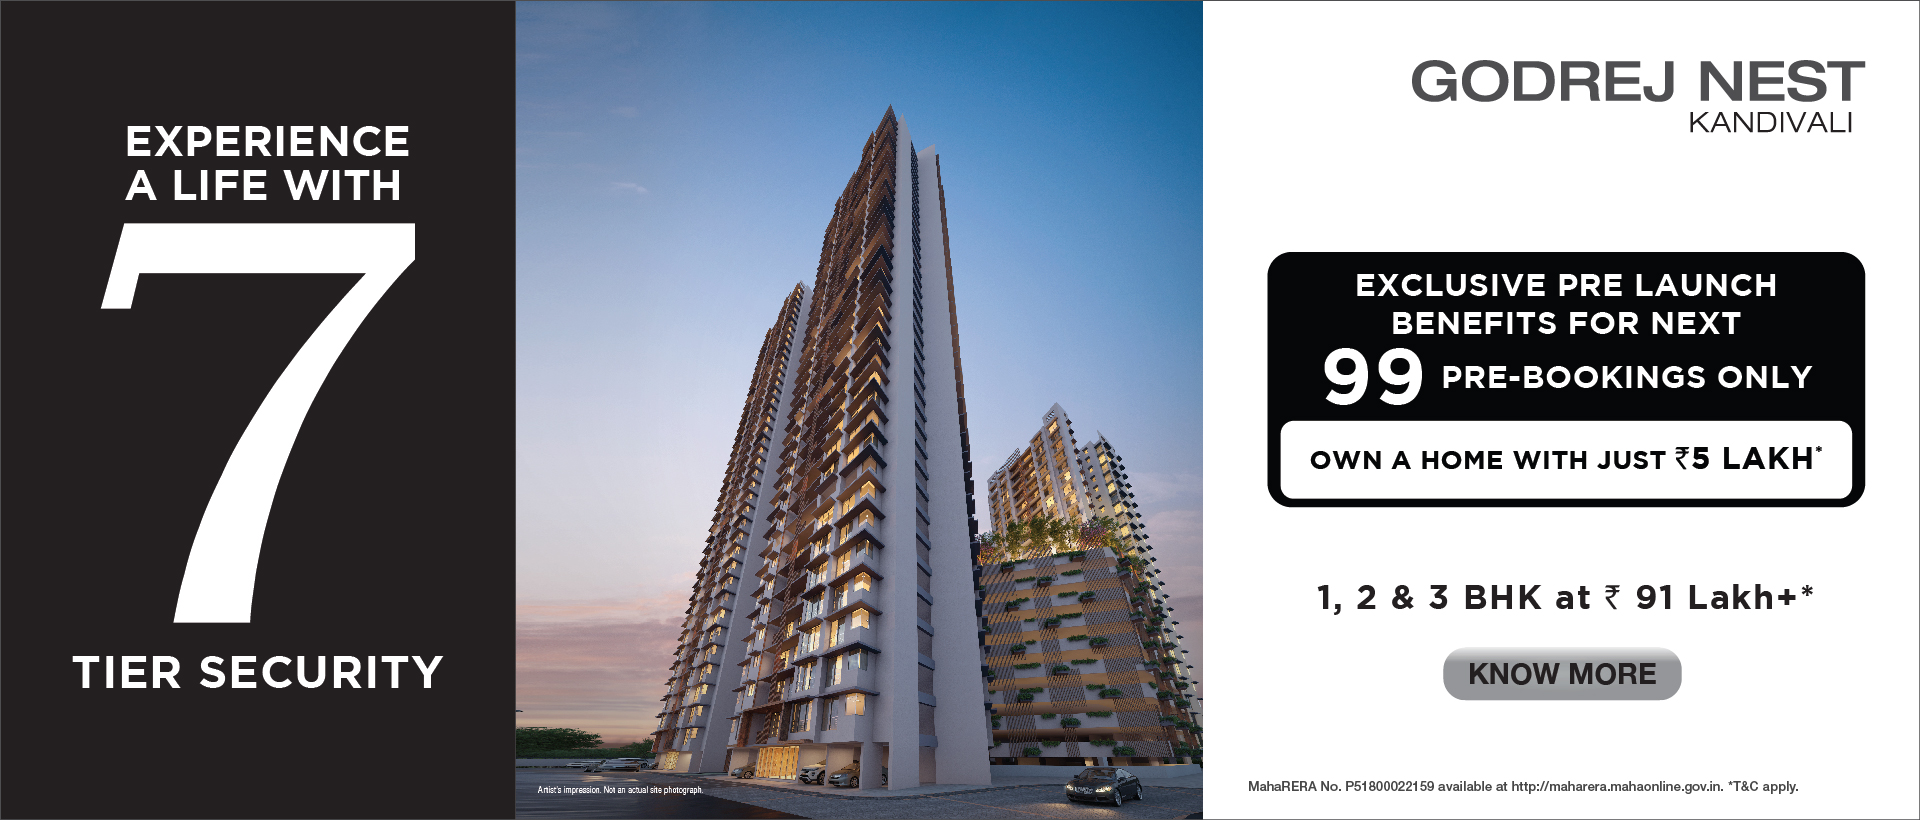 1, 2 and 3 bhk at Rs 91 lakh onwards at Godrej Nest in Noida